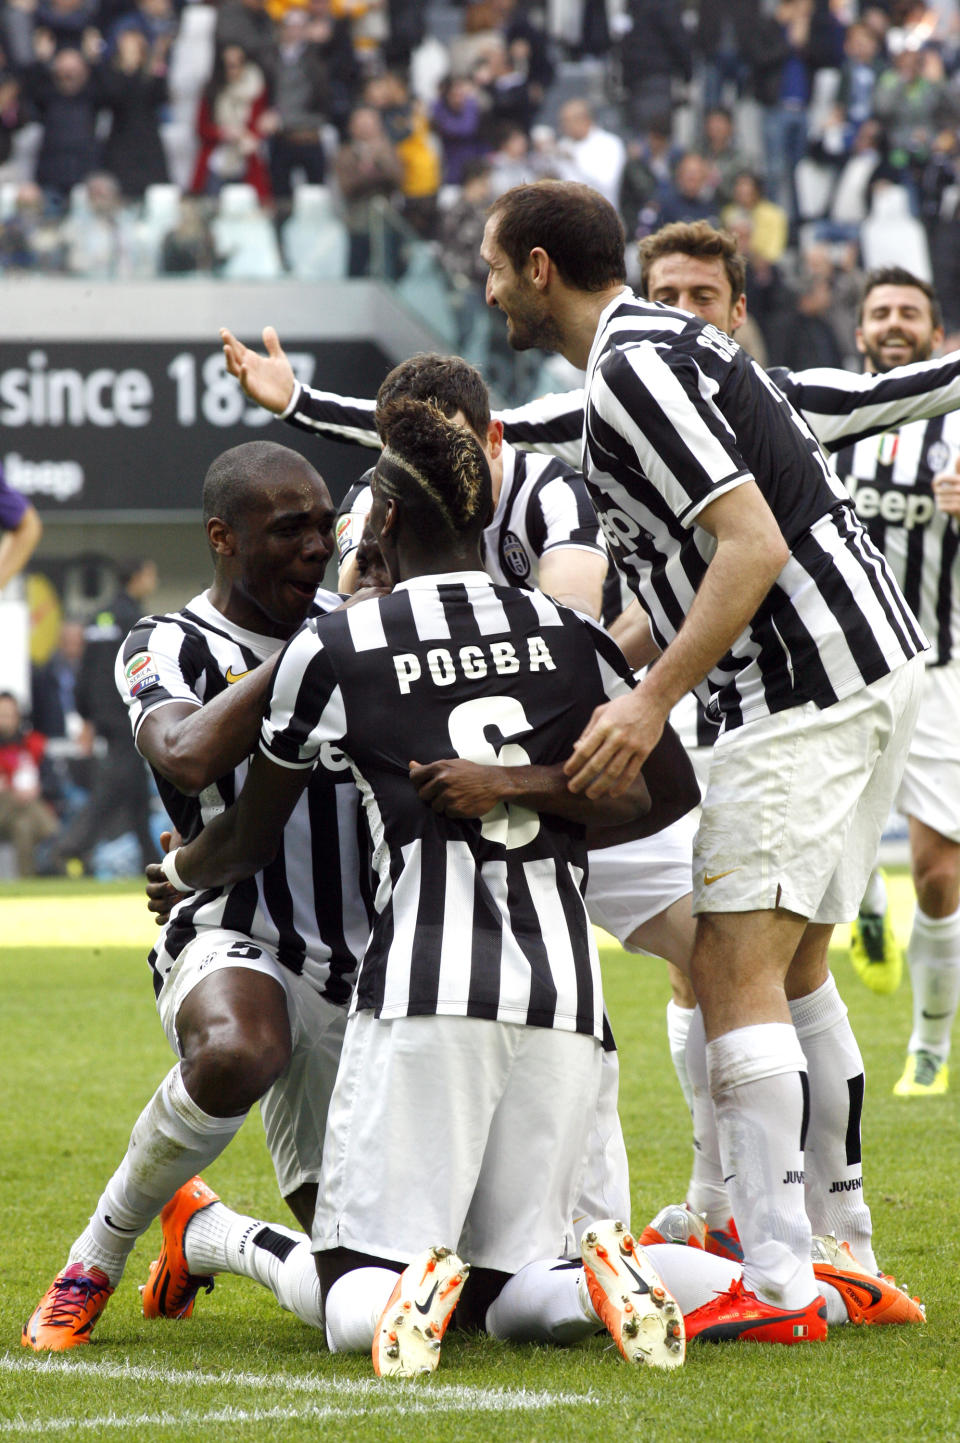 Juventus players celebrate after Kwadwo Asamoah scored during a Serie A soccer match between Juventus and Fiorentina at the Juventus stadium, in Turin, Italy, Sunday, March 9, 2014. (AP Photo/Massimo Pinca)